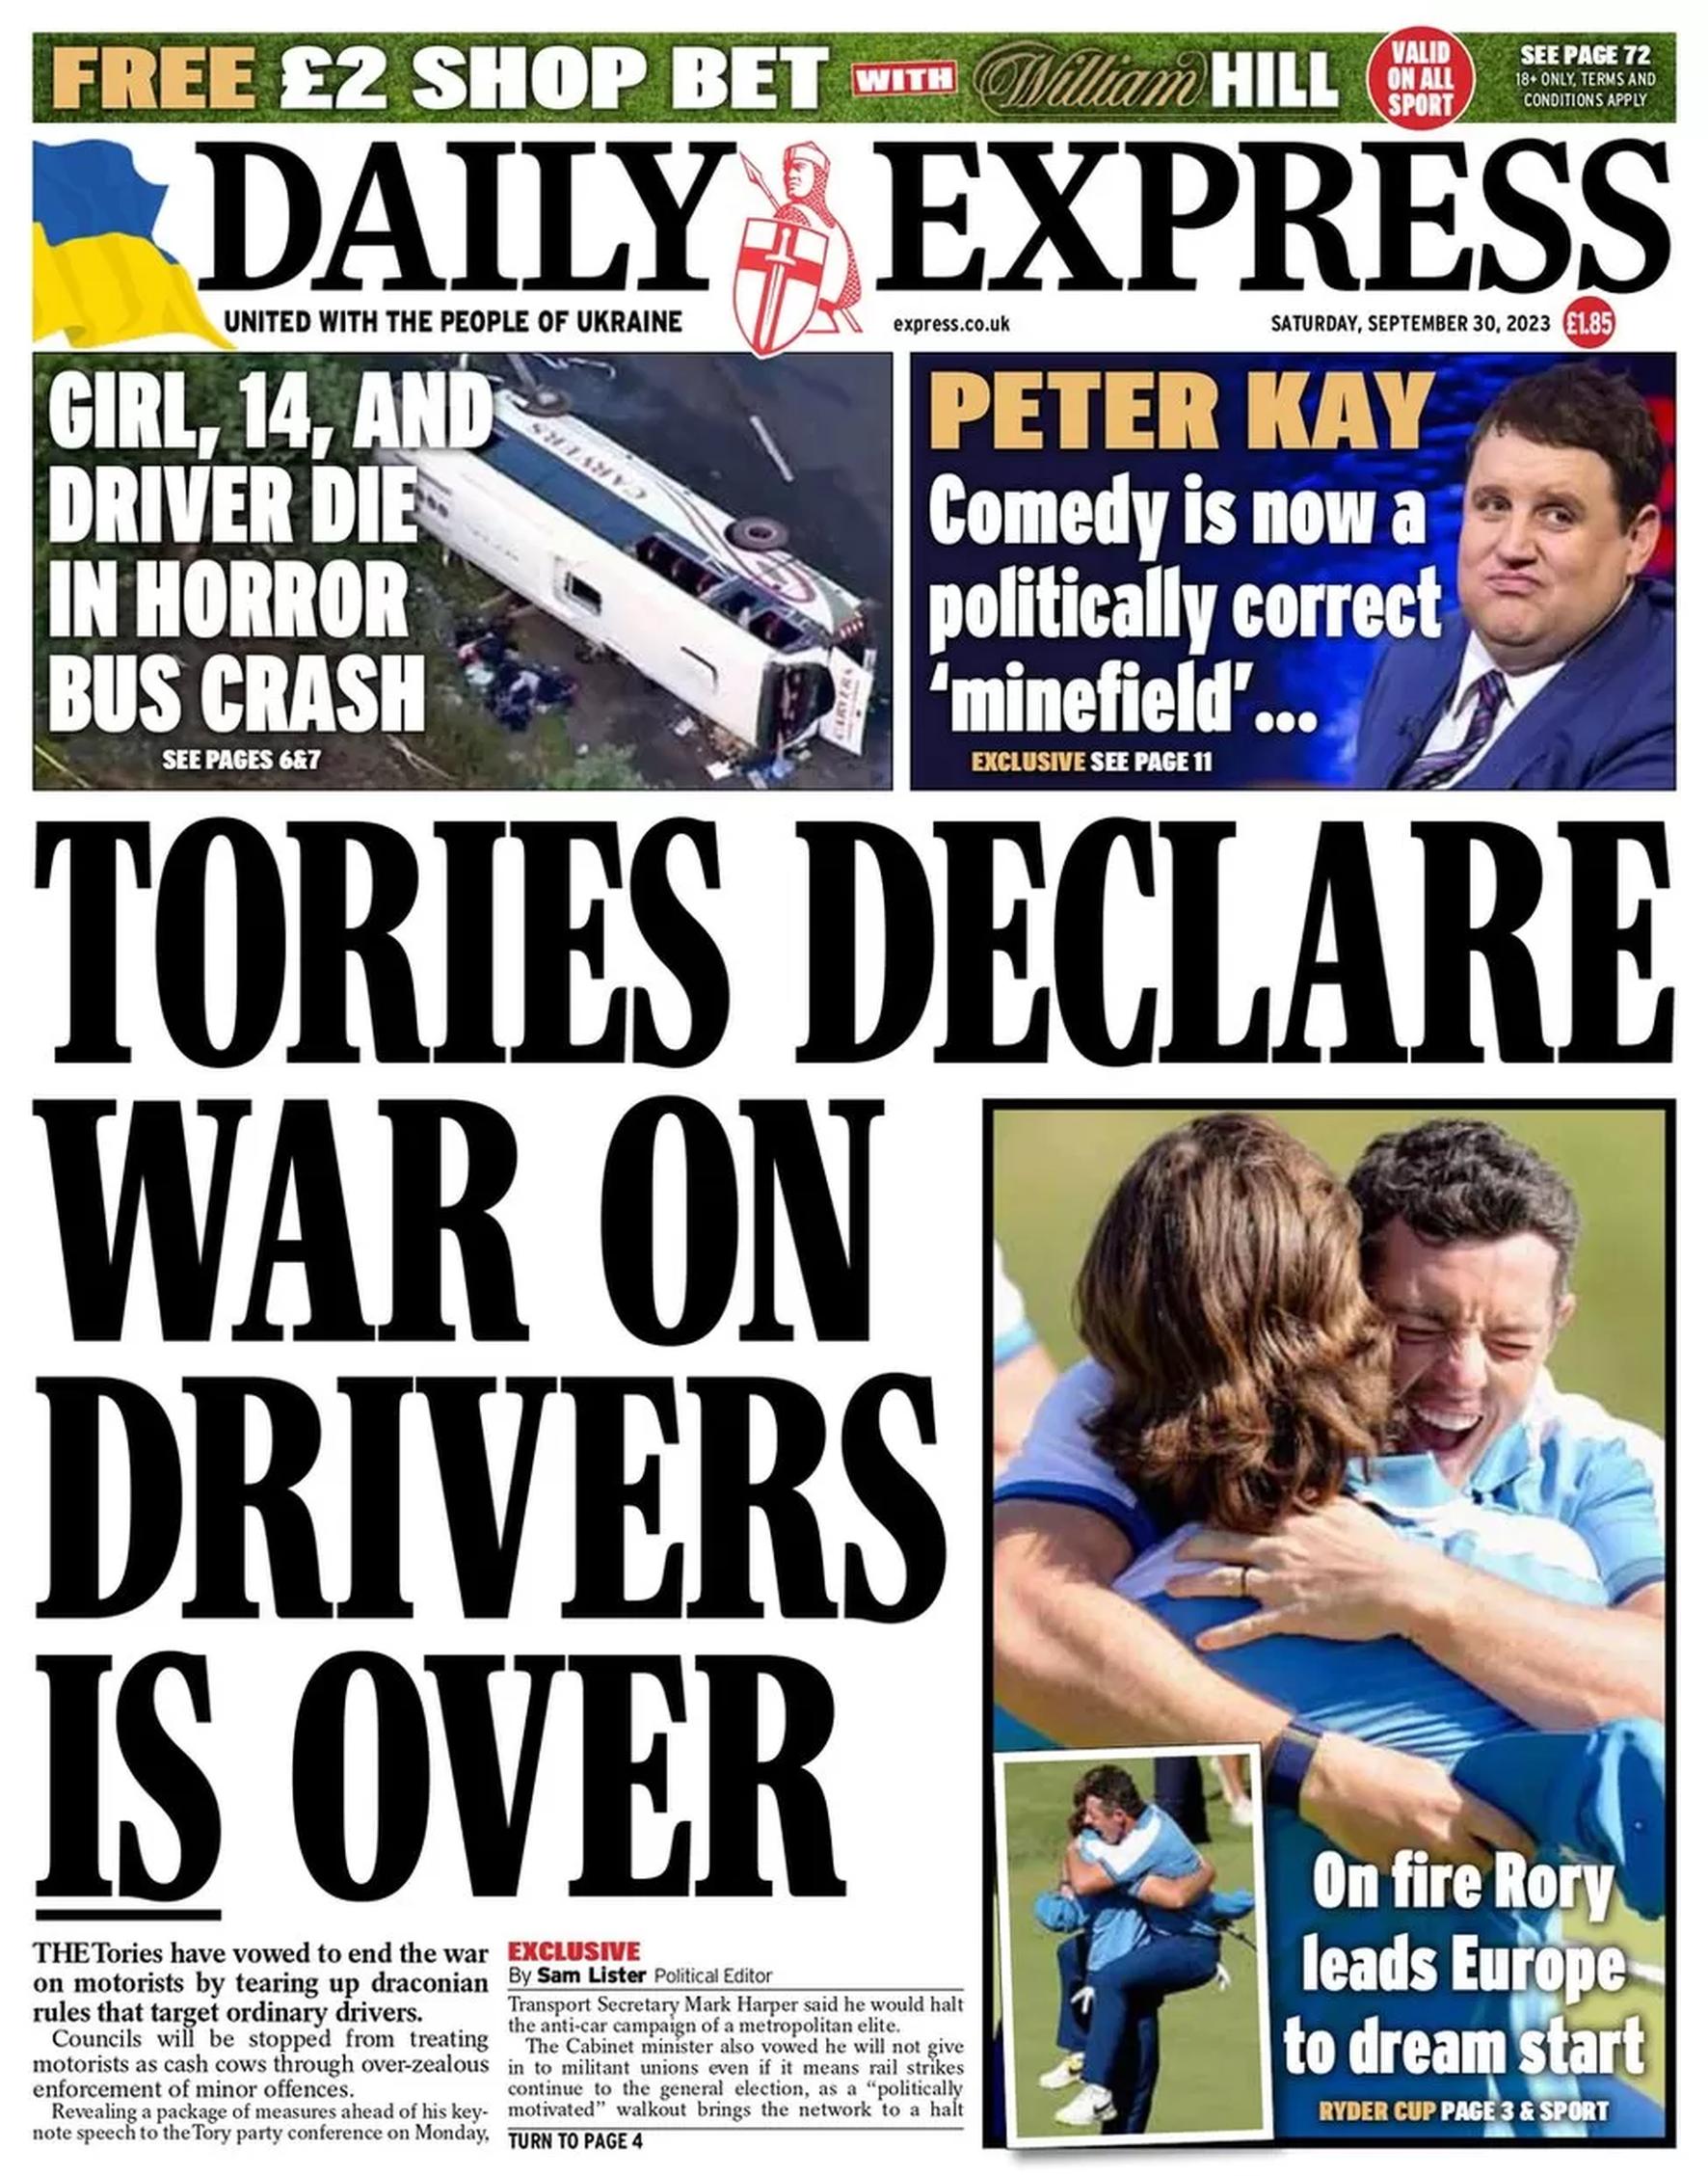 The PM`s new emphasis on supporting the rights of drivers is endorsed by newspapers such as the Daily Express